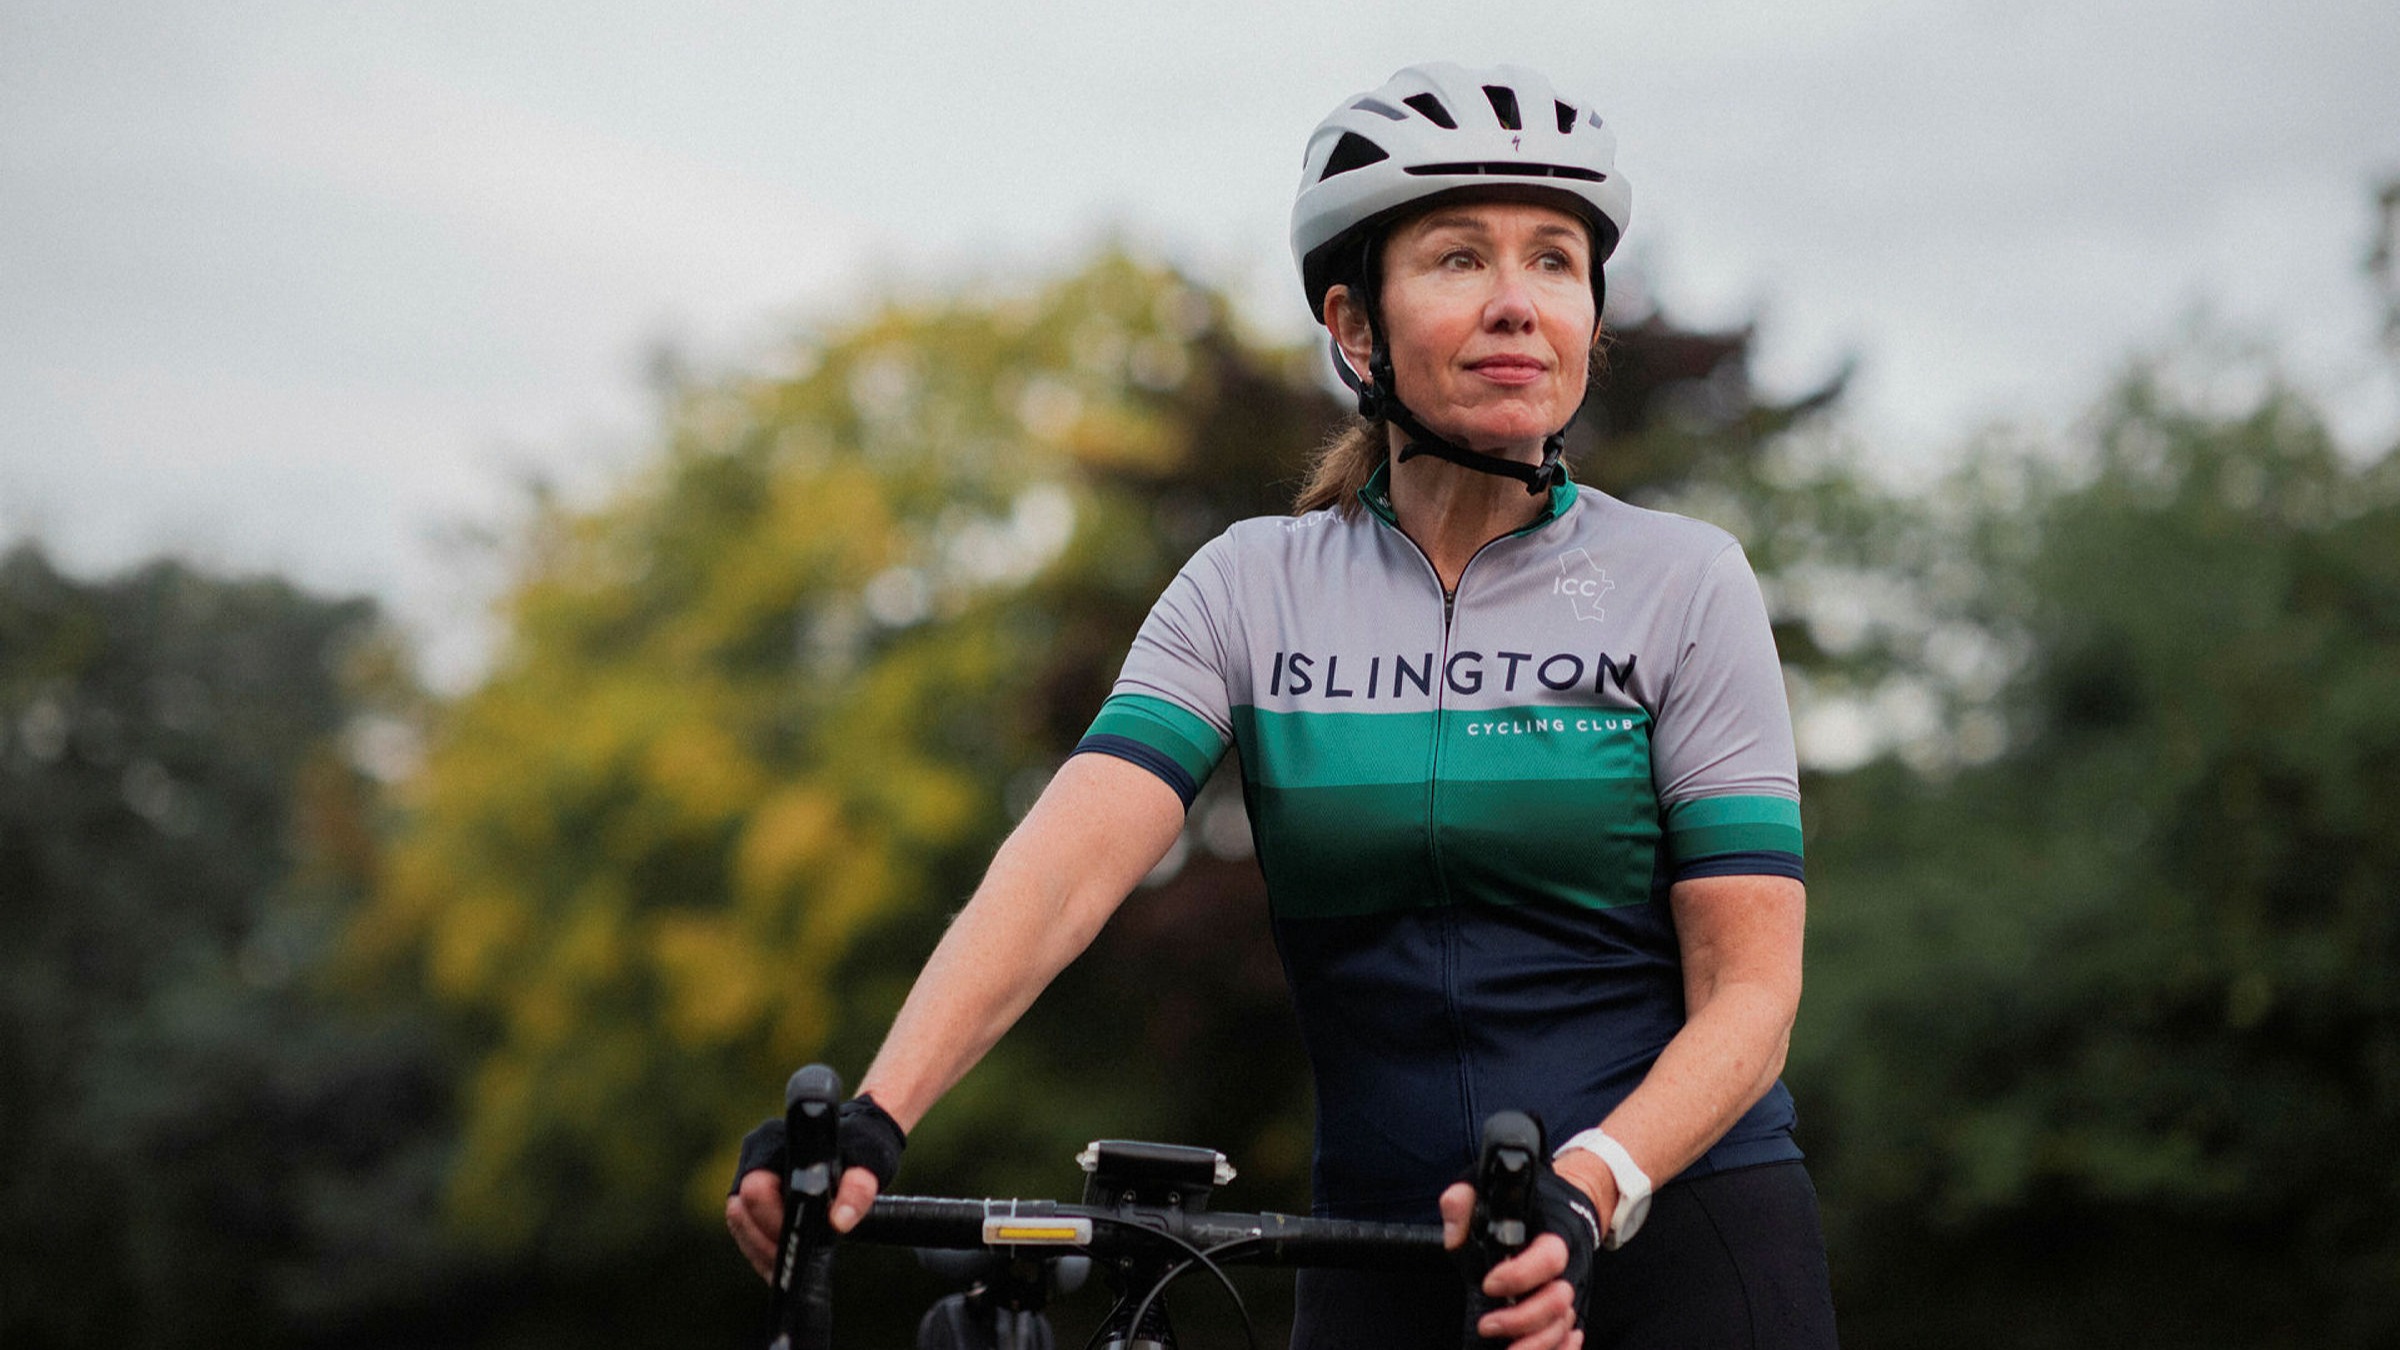 Wanneer Bedenk Fobie Women's cycling in London: the best routes and groups | Financial Times